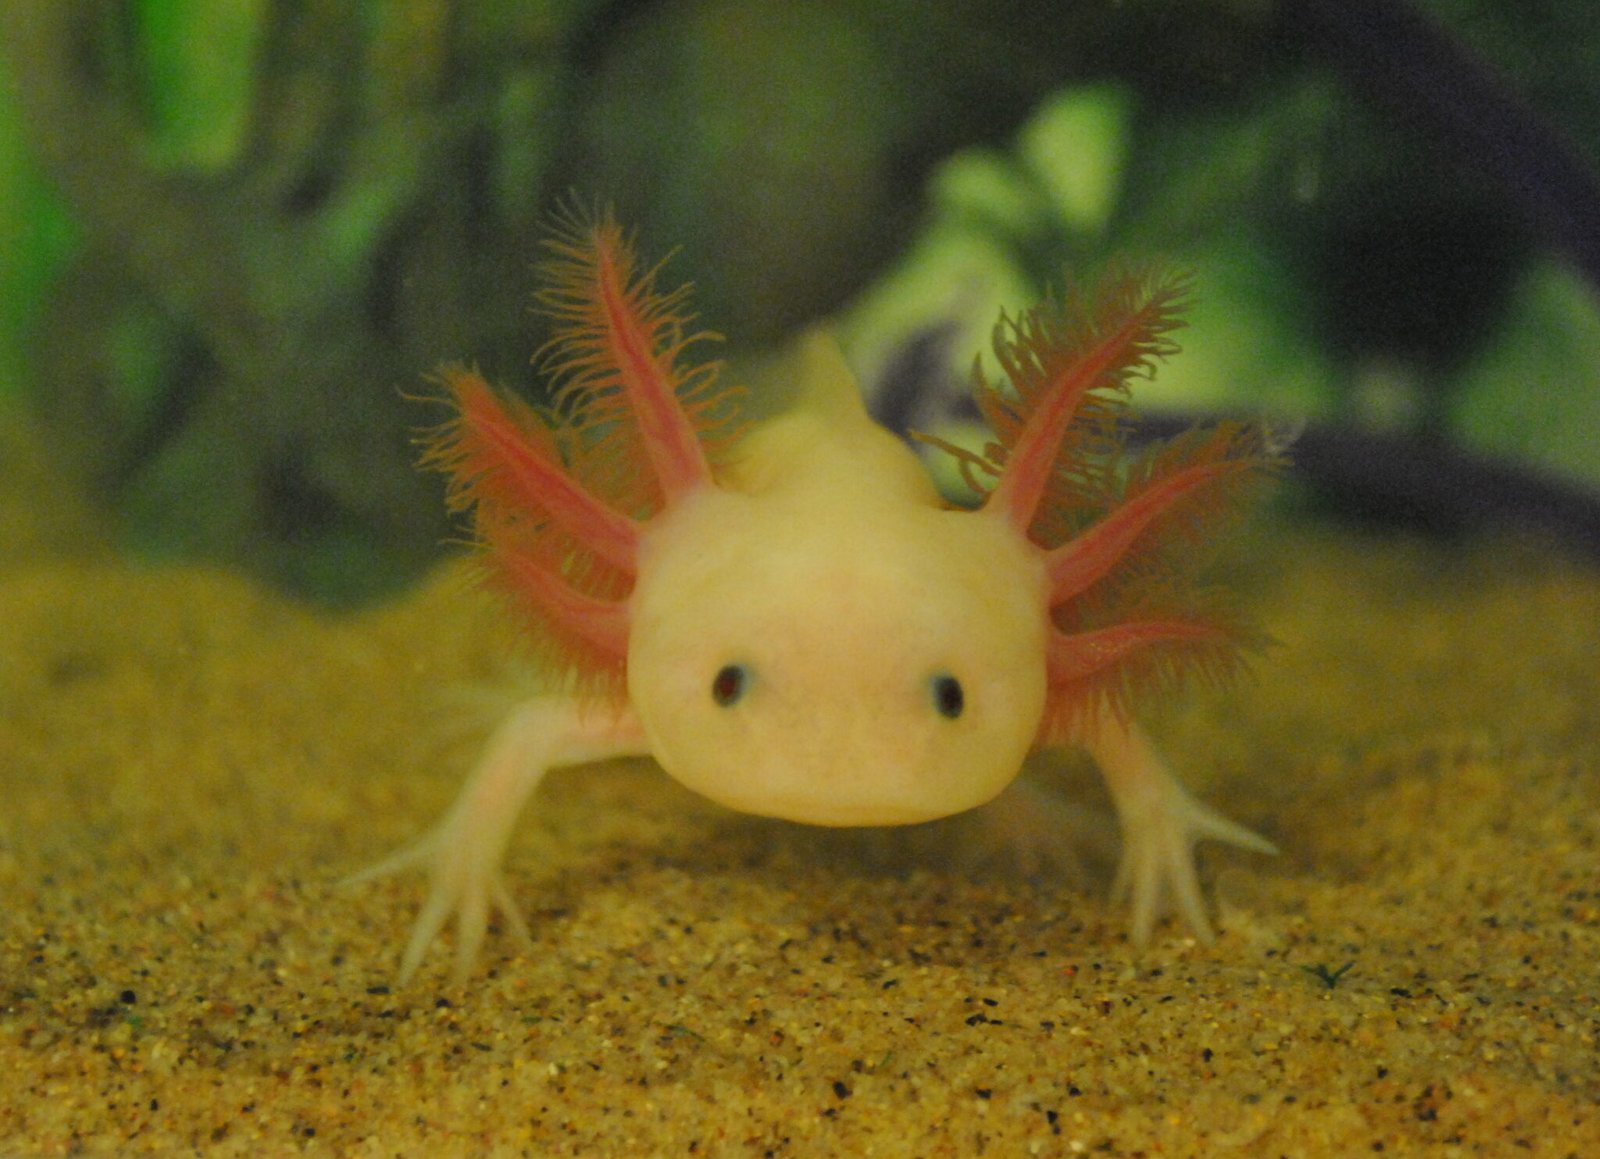 Axolotl Facts for Kids